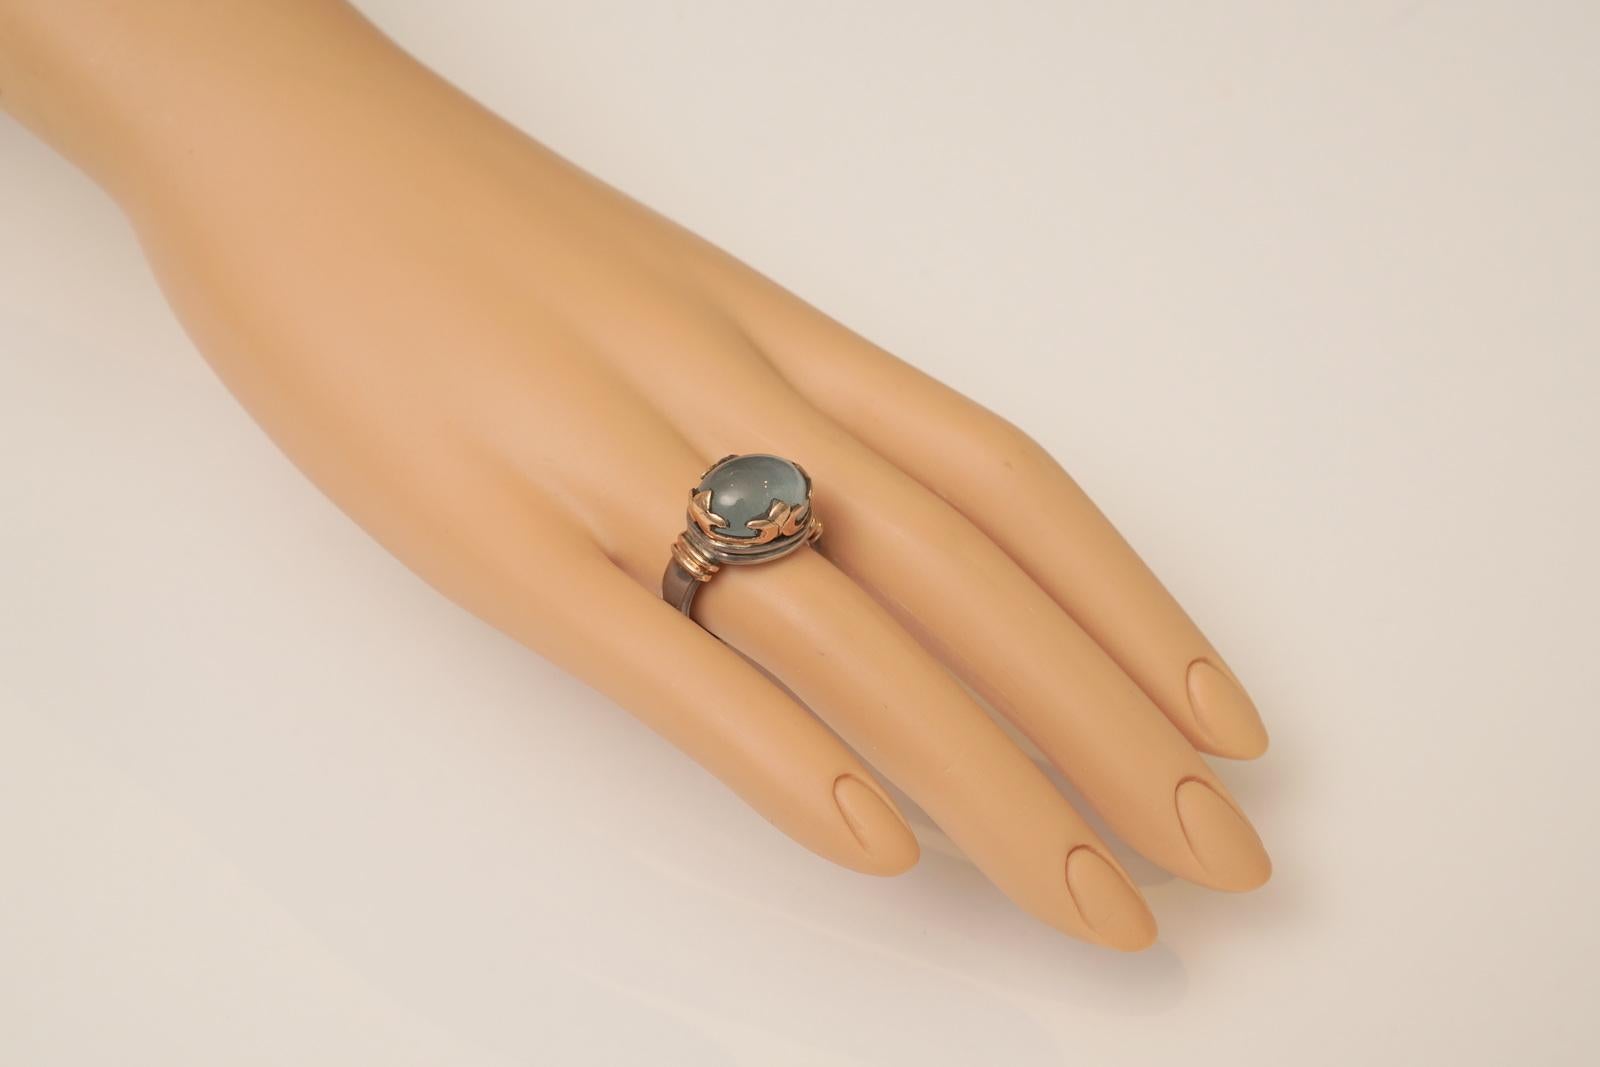 Classic with a twist, a large cabochon aquamarine set with a weighted (as in not plated) 18K gold Fleur de Lis bezel and same gold accents along the top. Otherwise, the band is in sterling silver. Ring size is 6.75